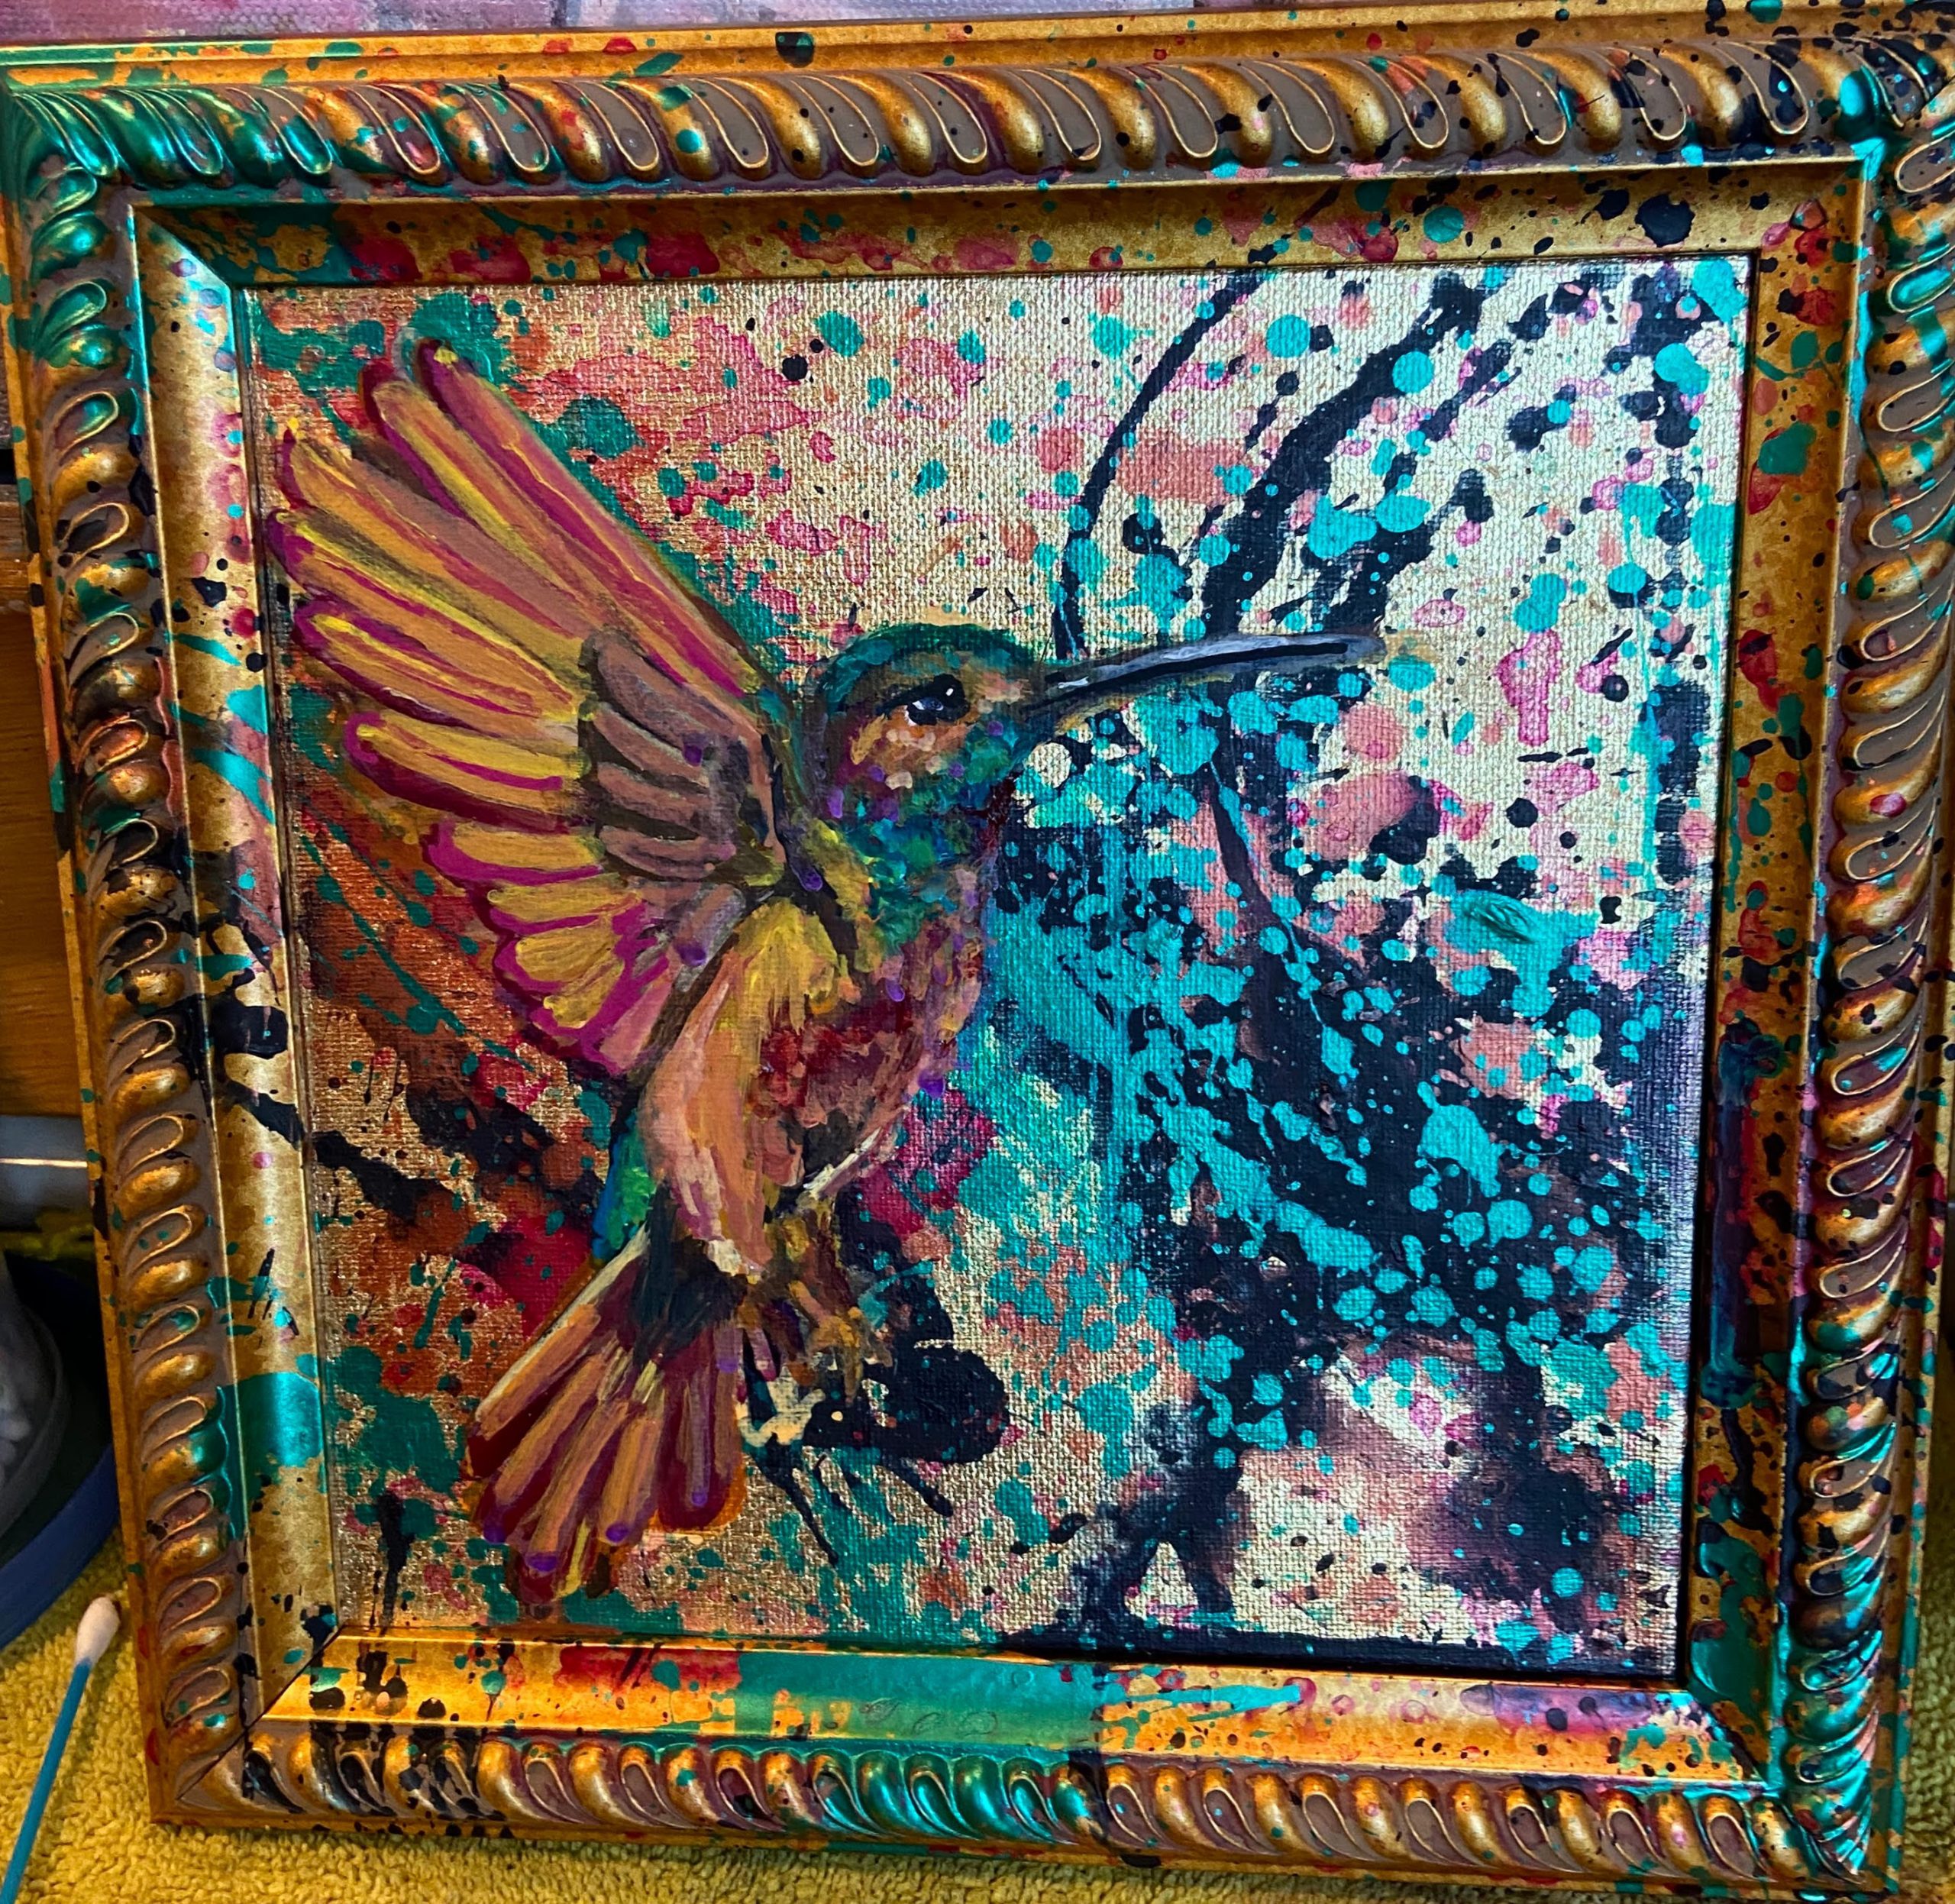 Hummingbird painting done with acrylics on a gold-leaf canvas